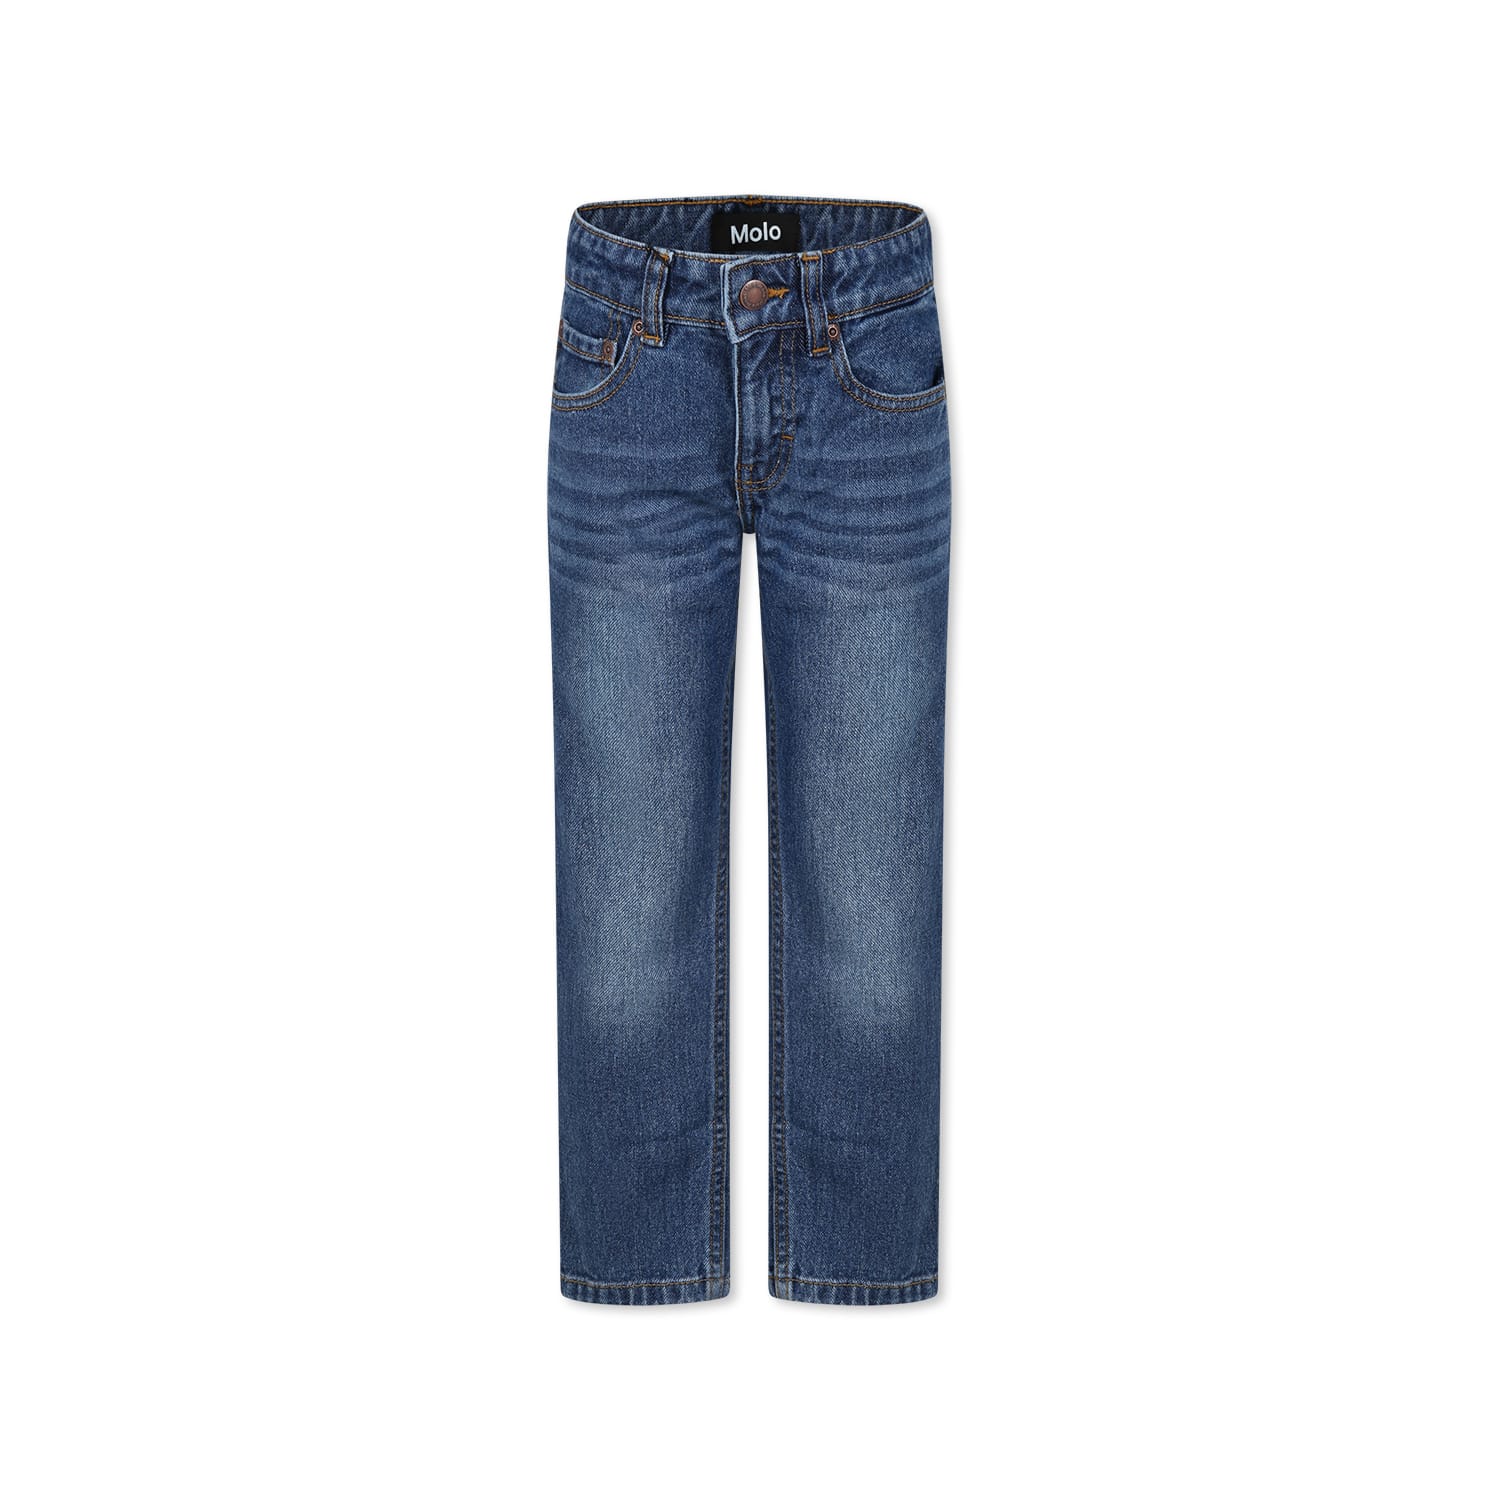 Molo Kids' Blue Andy Jeans For Boy